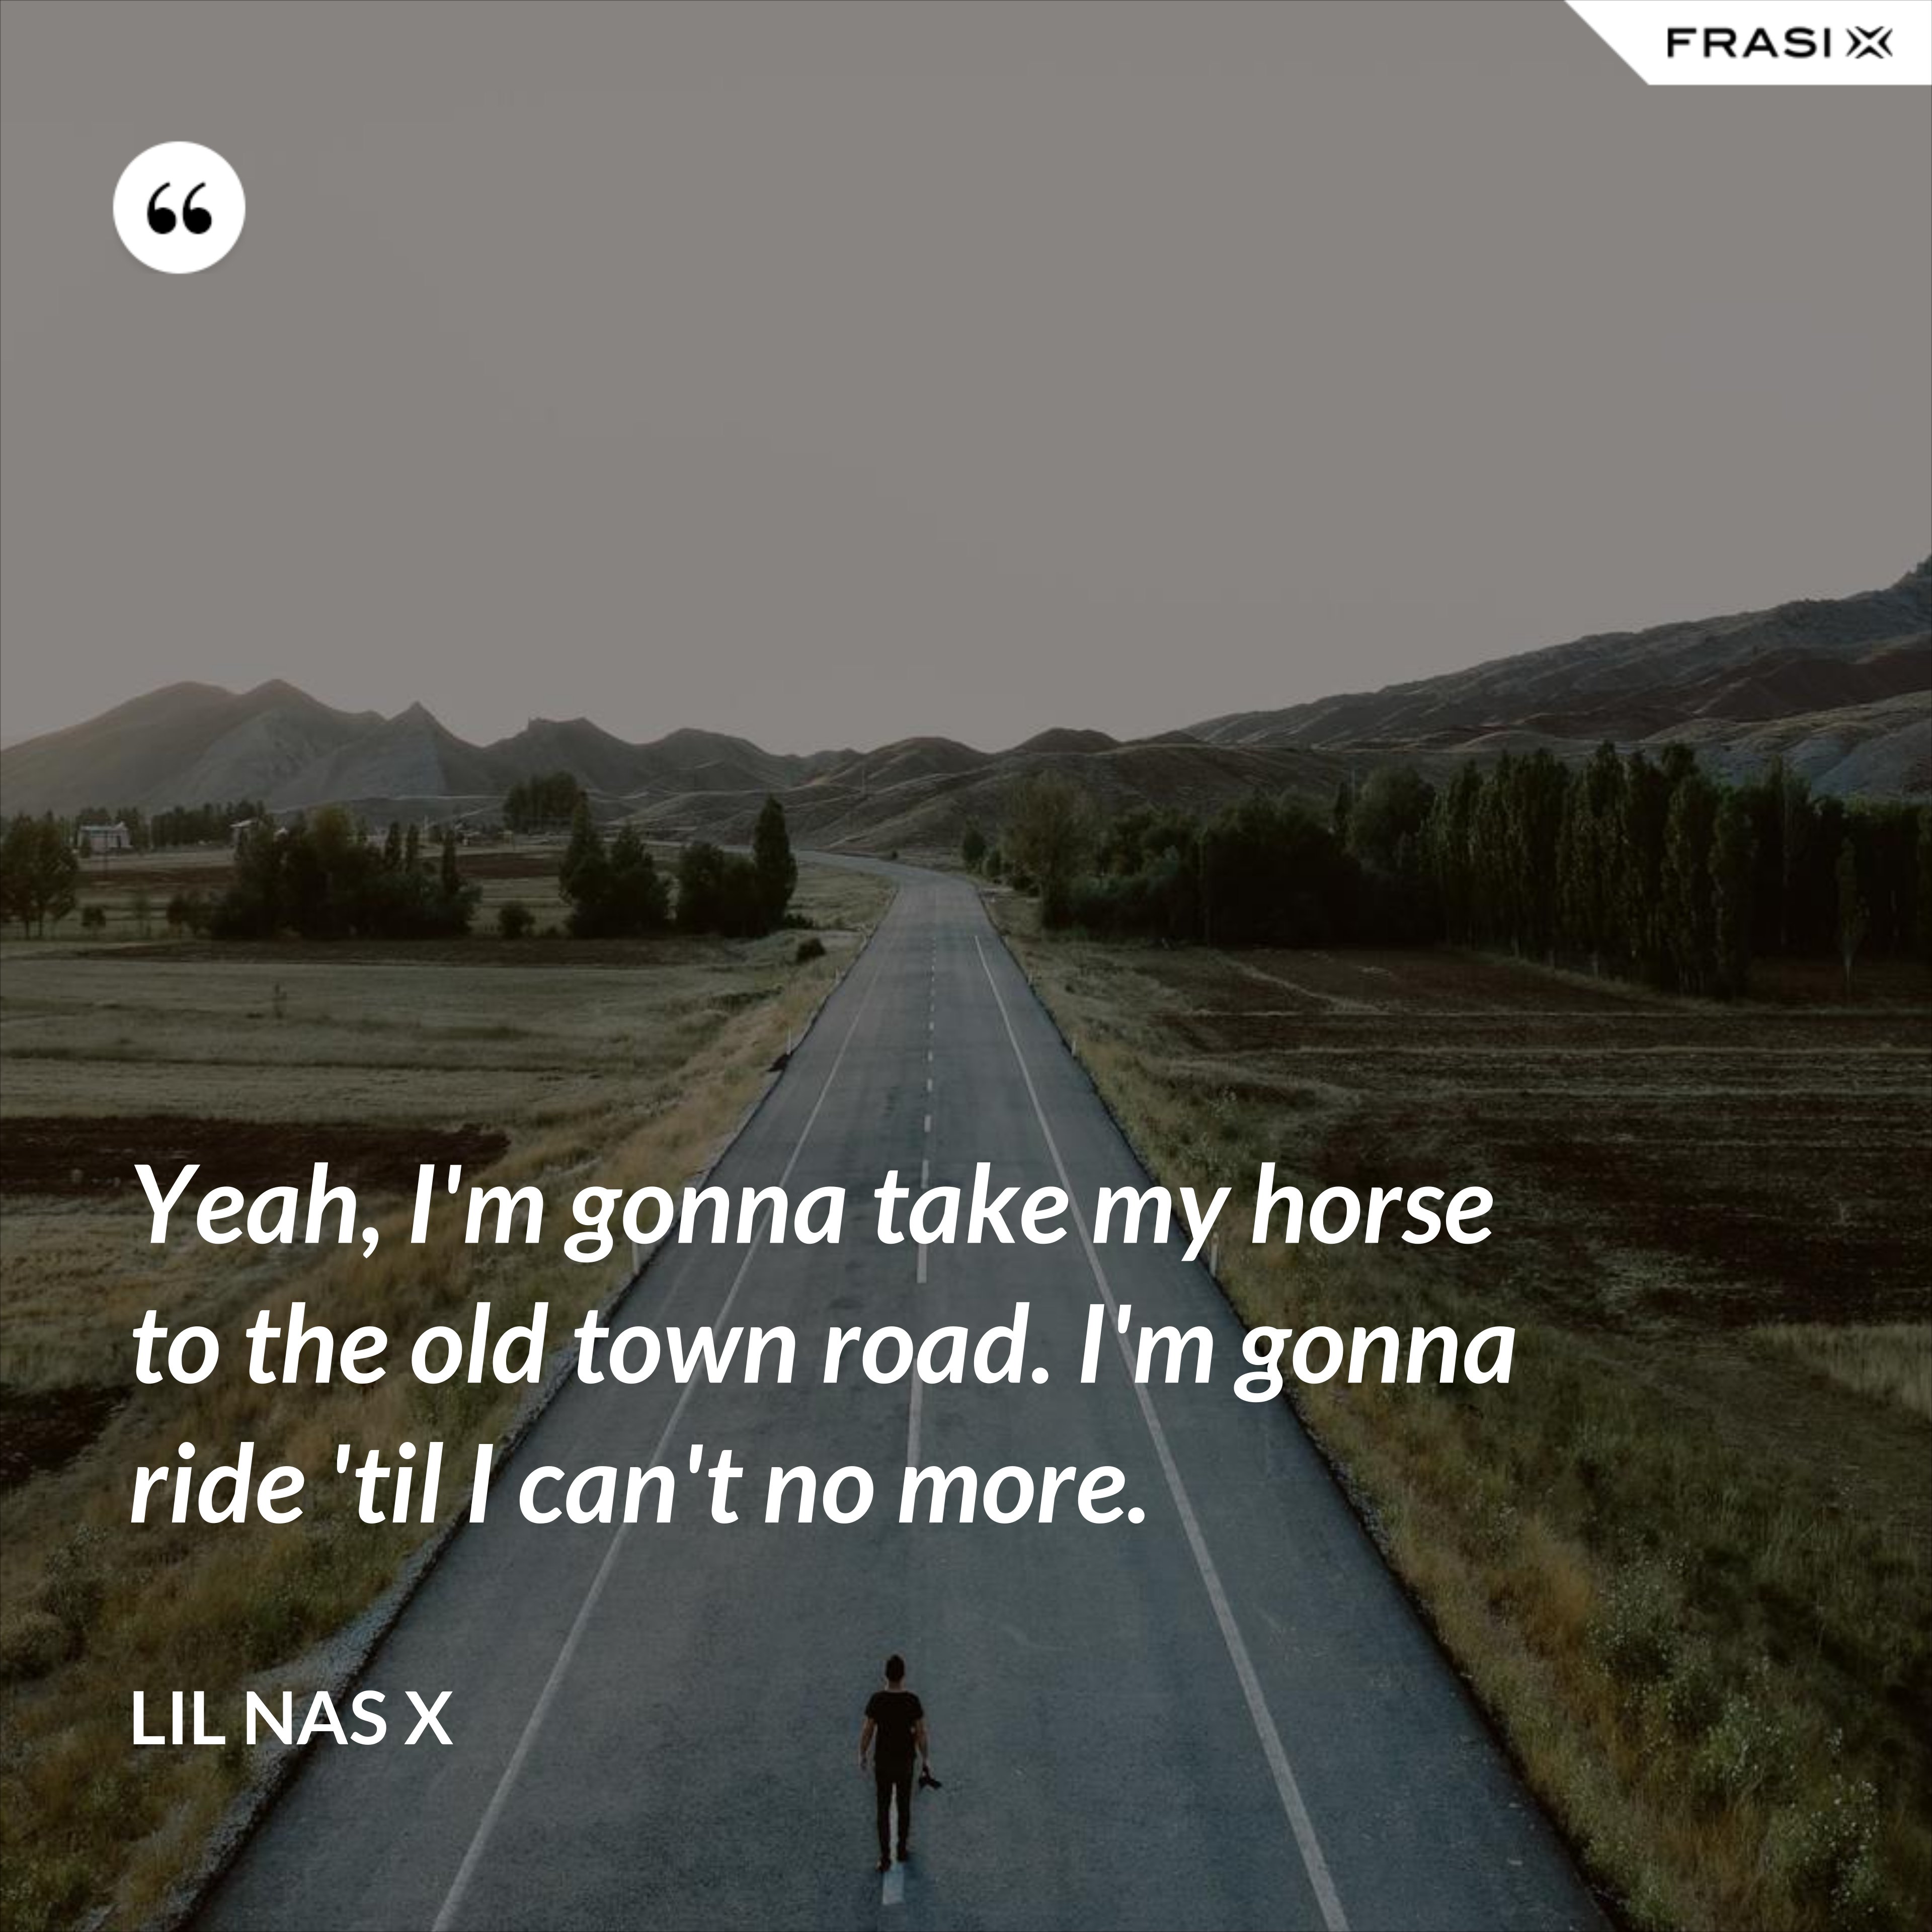 Yeah, I'm gonna take my horse to the old town road. I'm gonna ride 'til I can't no more. - Lil Nas X